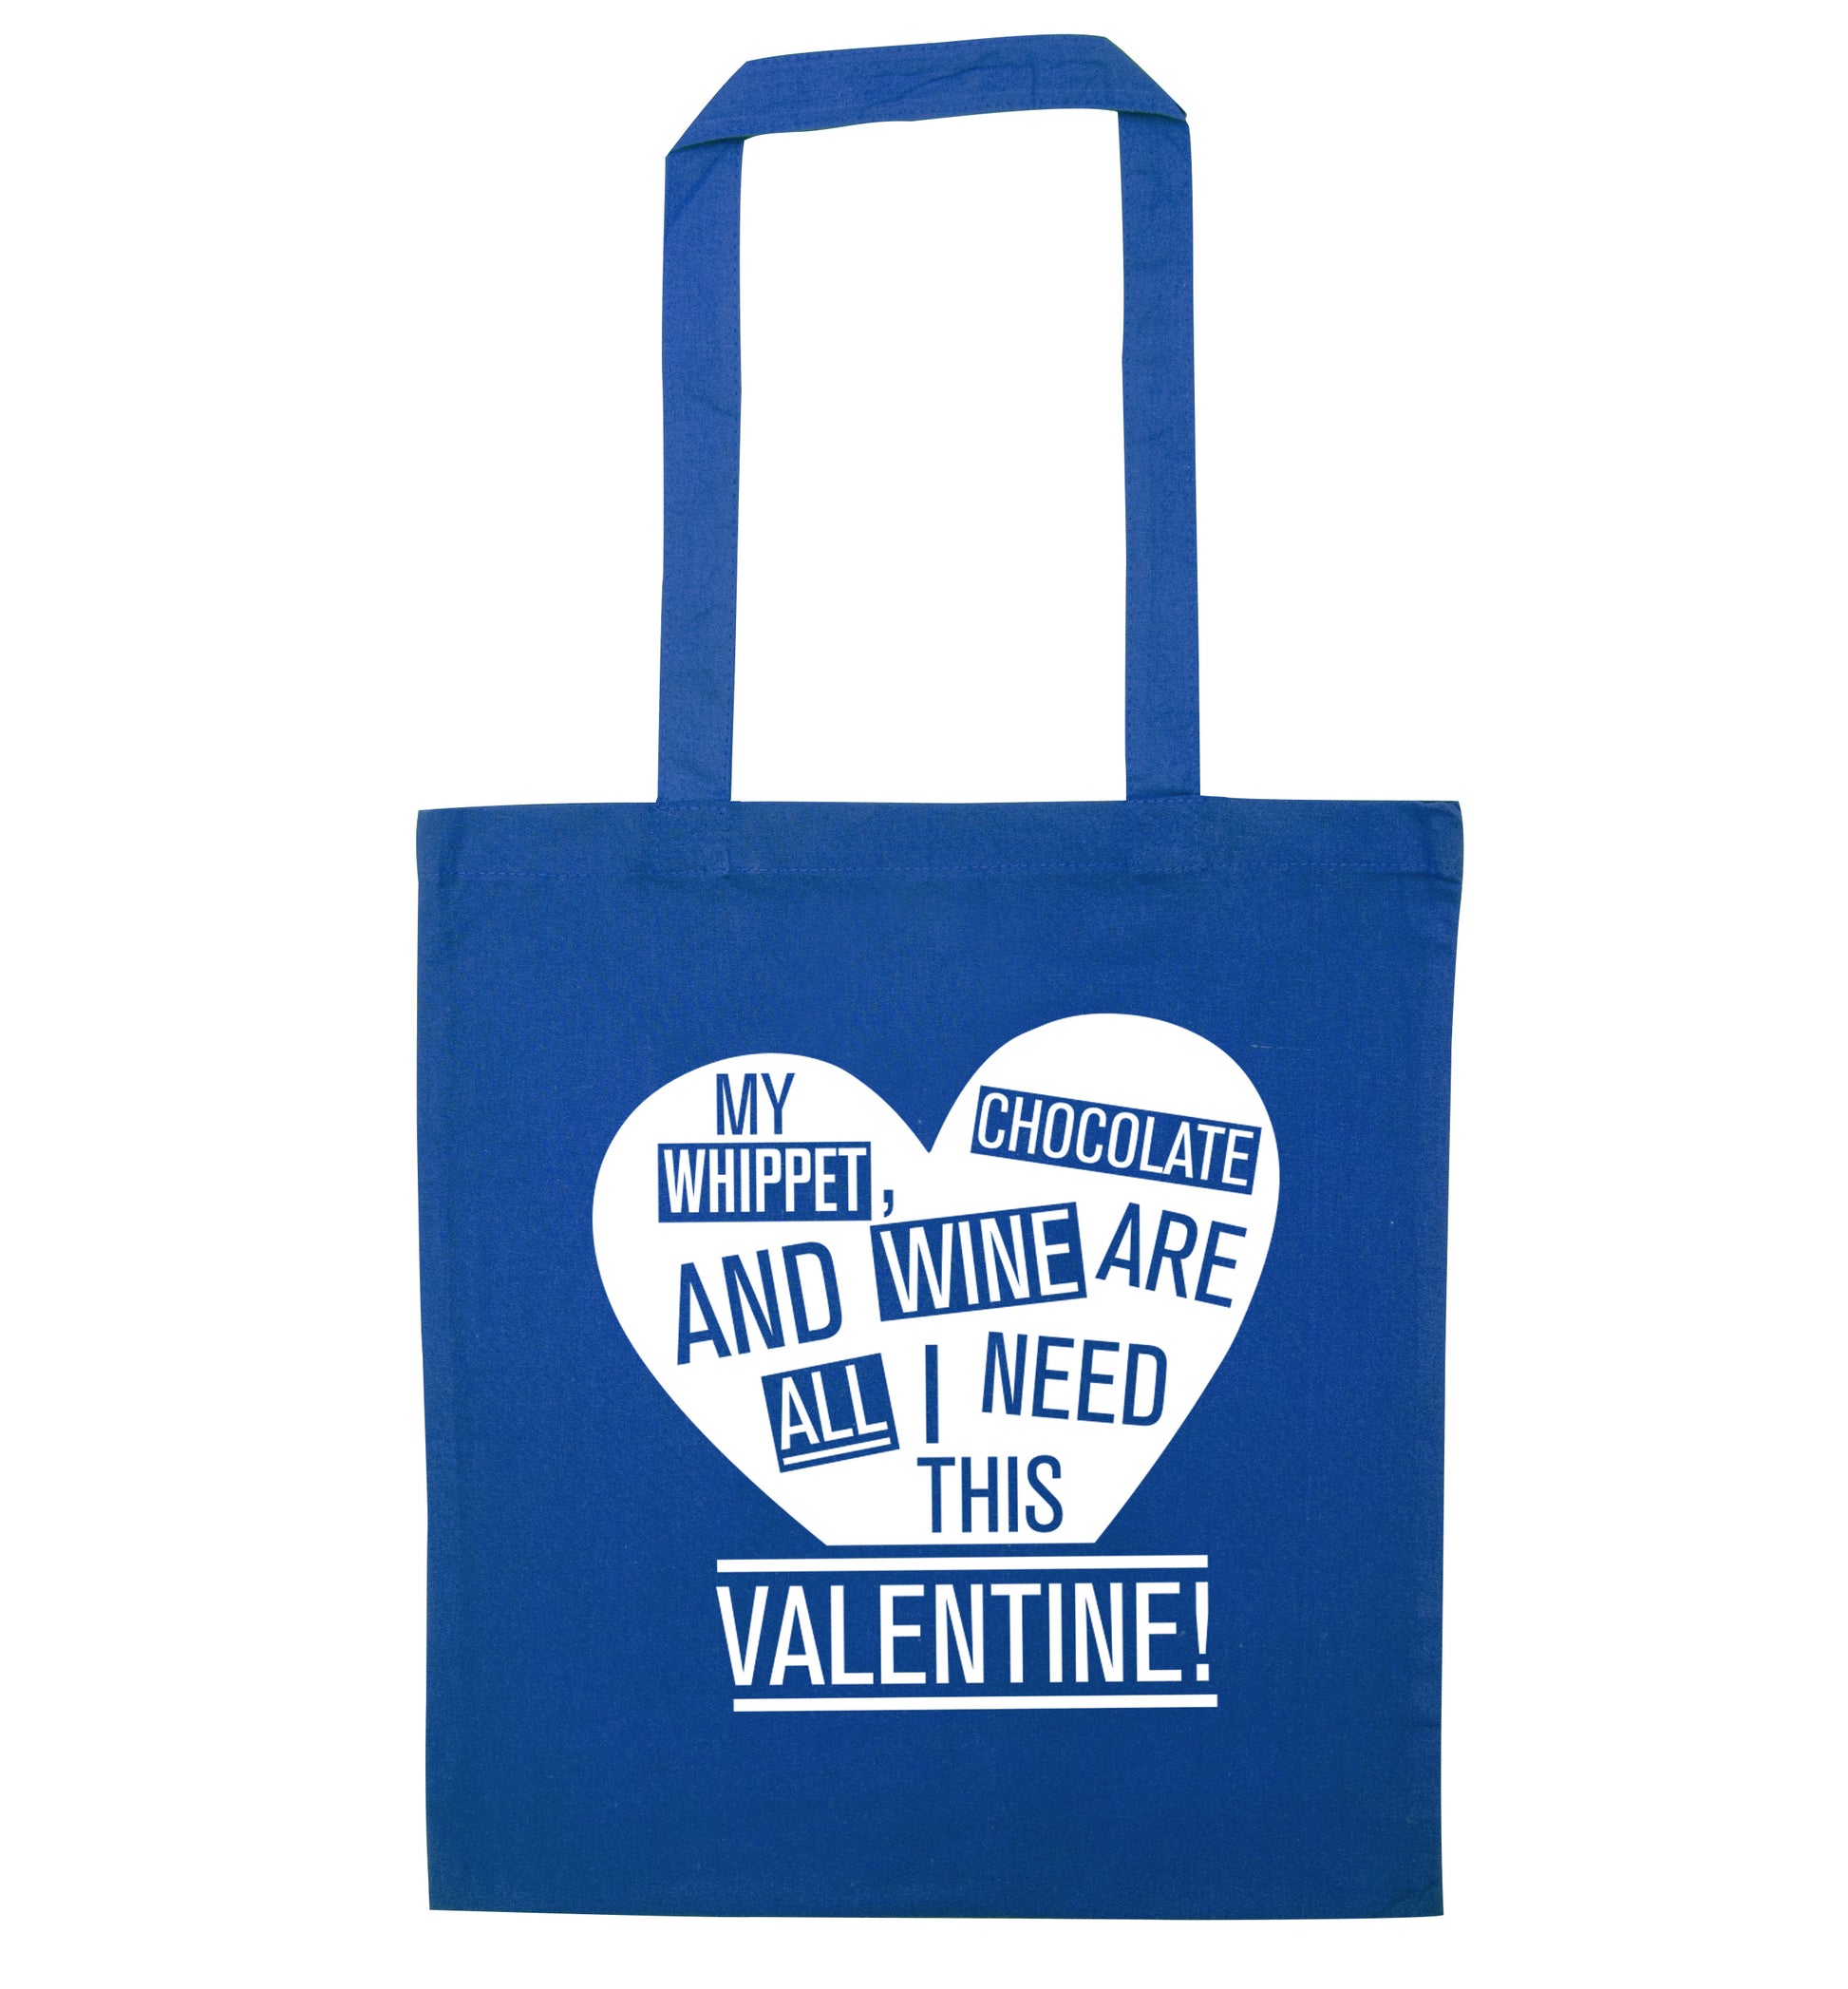 My whippet, chocolate and wine are all I need this valentine! blue tote bag